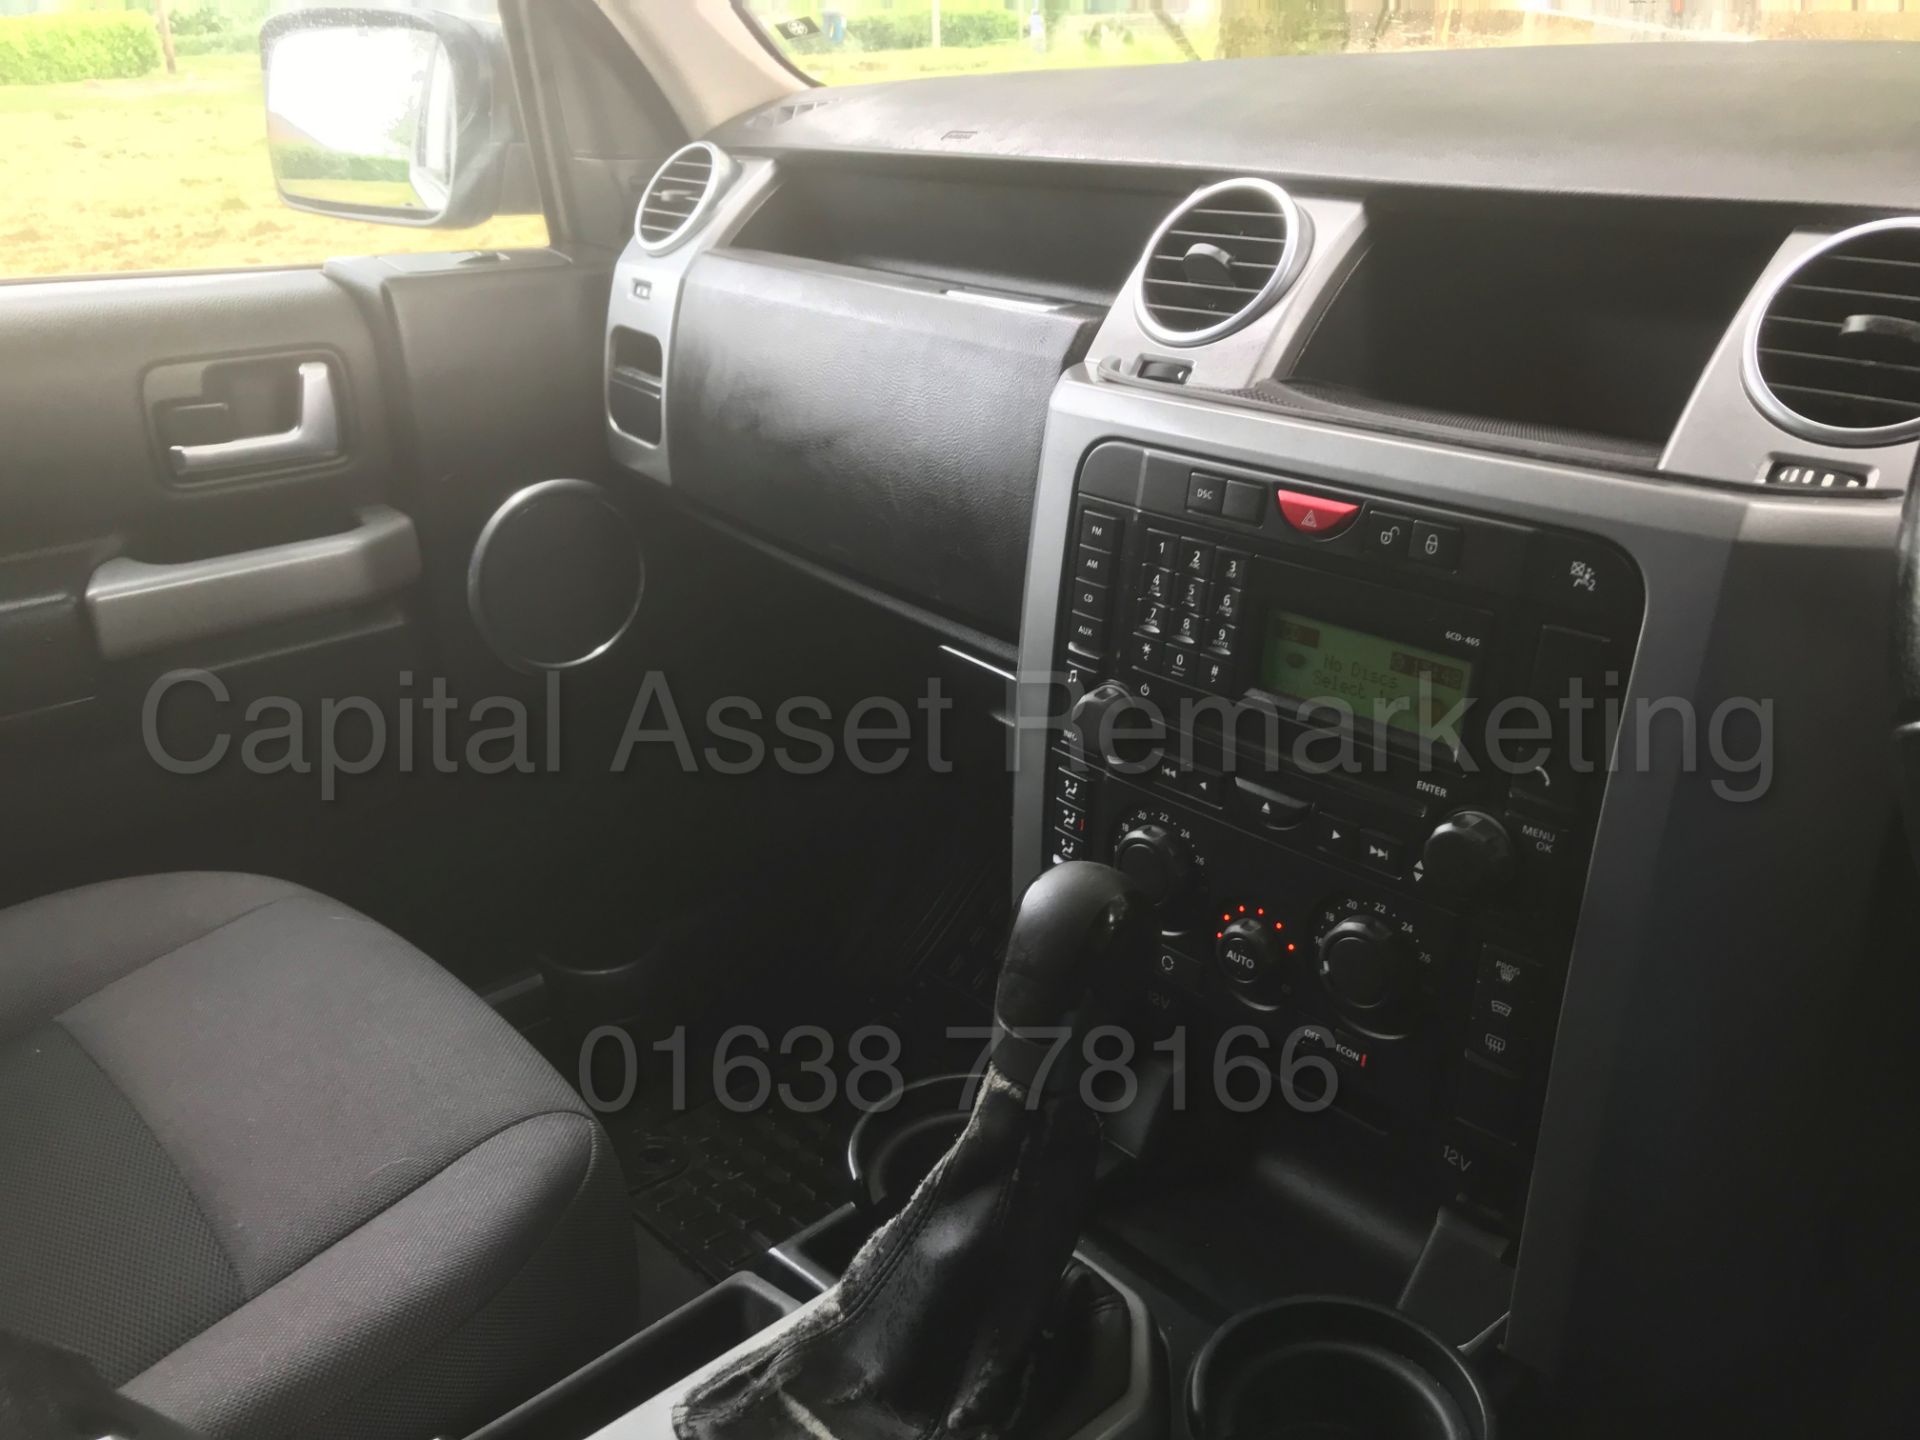 (On Sale) LAND ROVER DISCOVERY 3 'XS EDITION' **COMMERCIAL VAN**(2008 MODEL) 'TDV6-190 BHP' (NO VAT) - Image 32 of 38